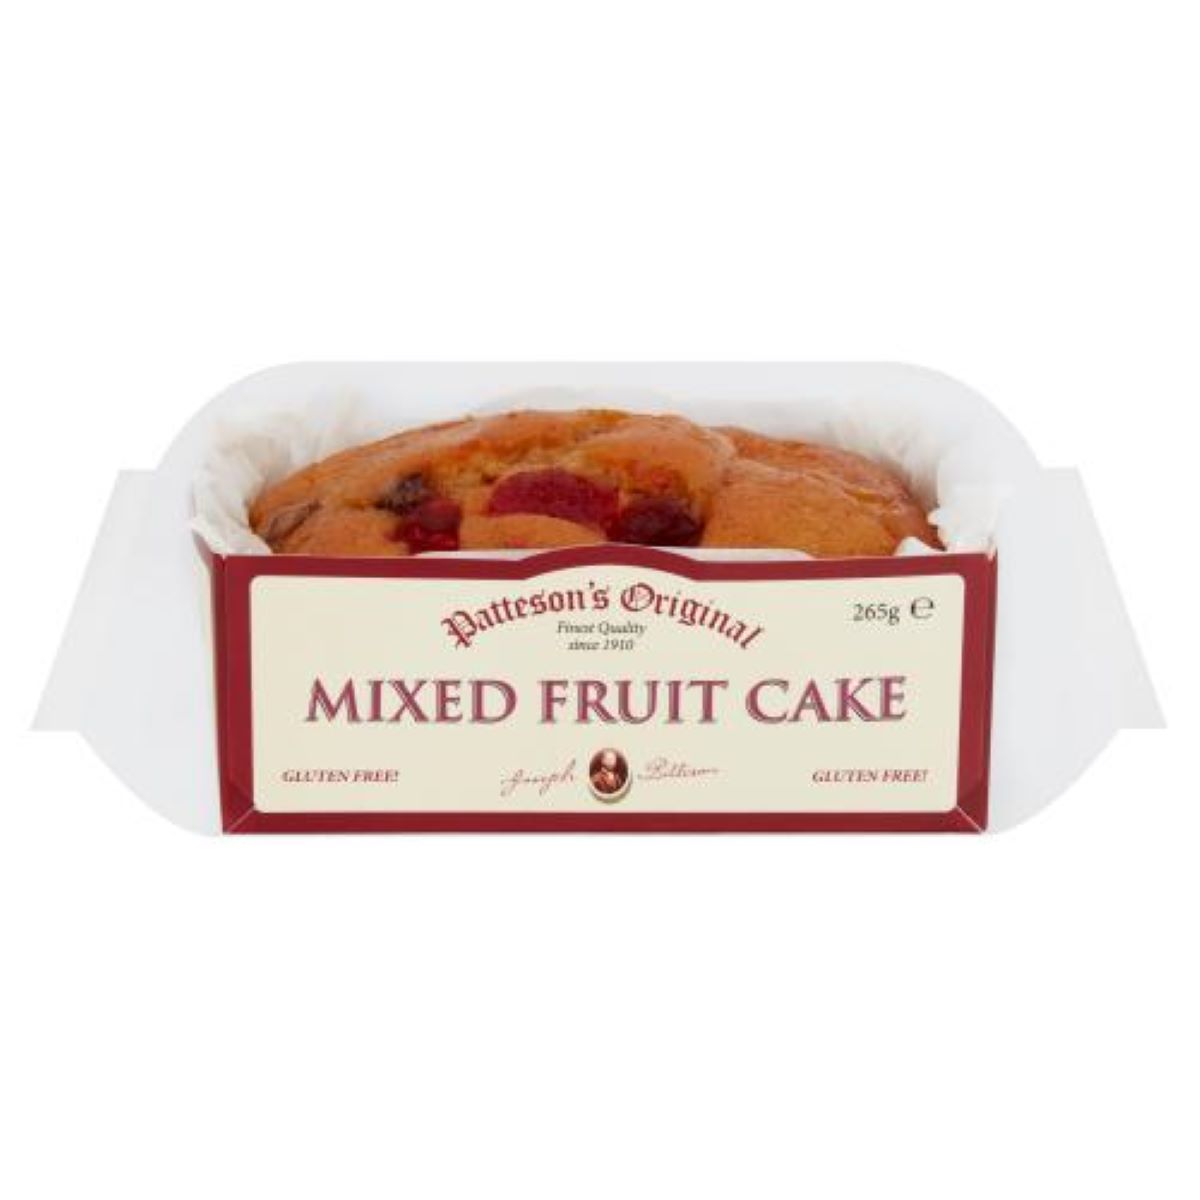 Patteson's Gluten Free Mixed Fruit Loaf Cake 285g